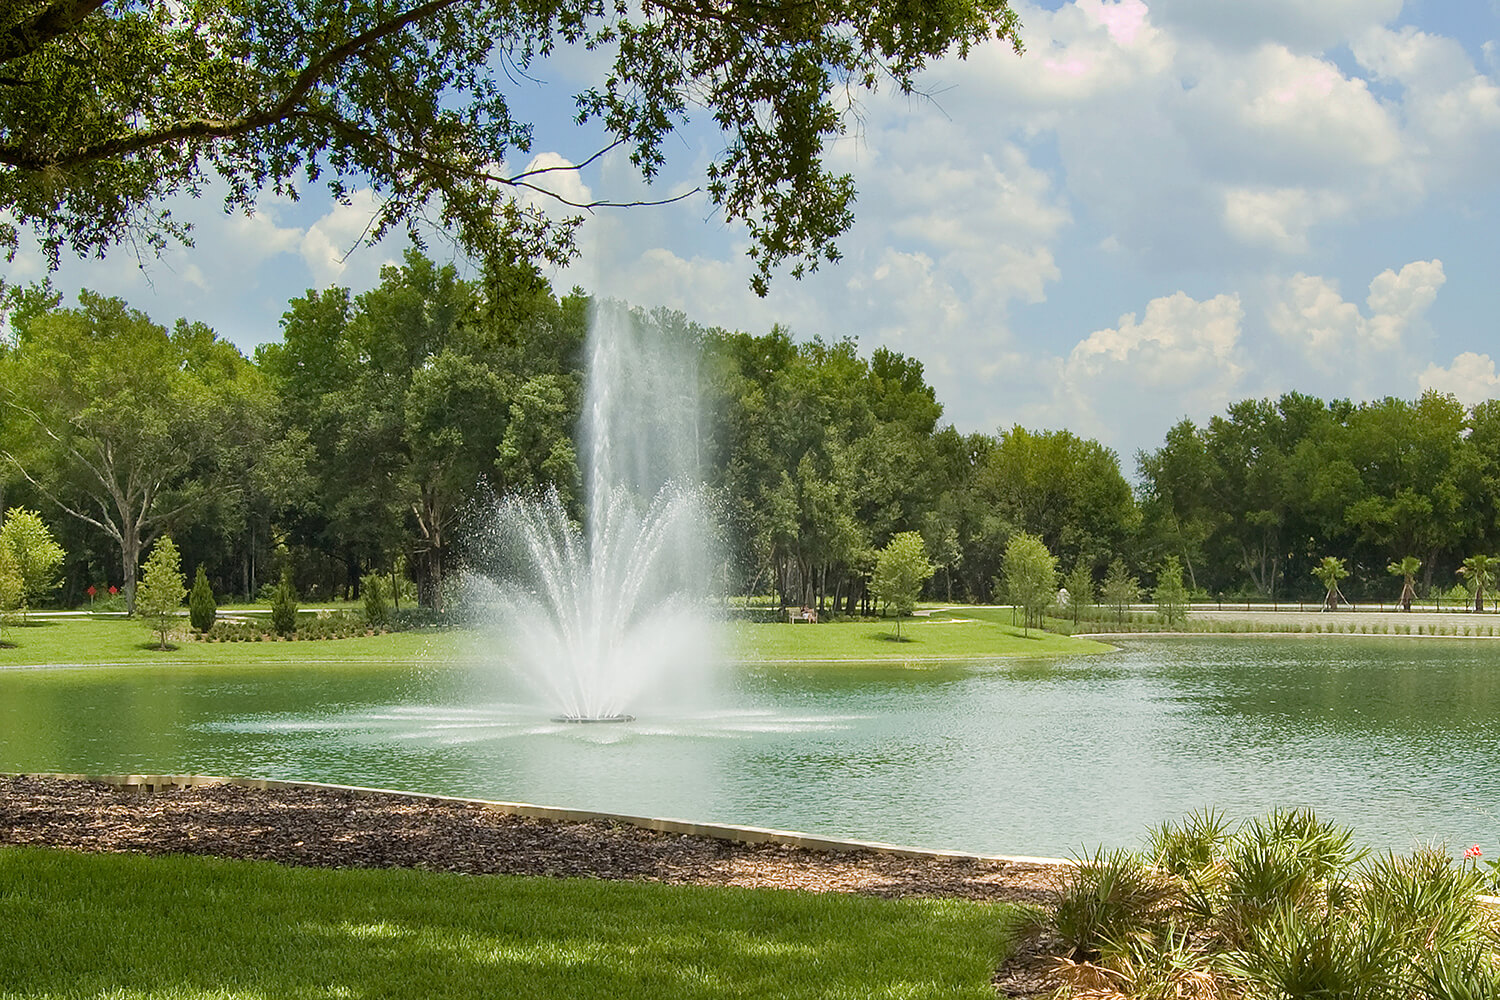 One of Otterbine's Triad Giant Aerating Fountains